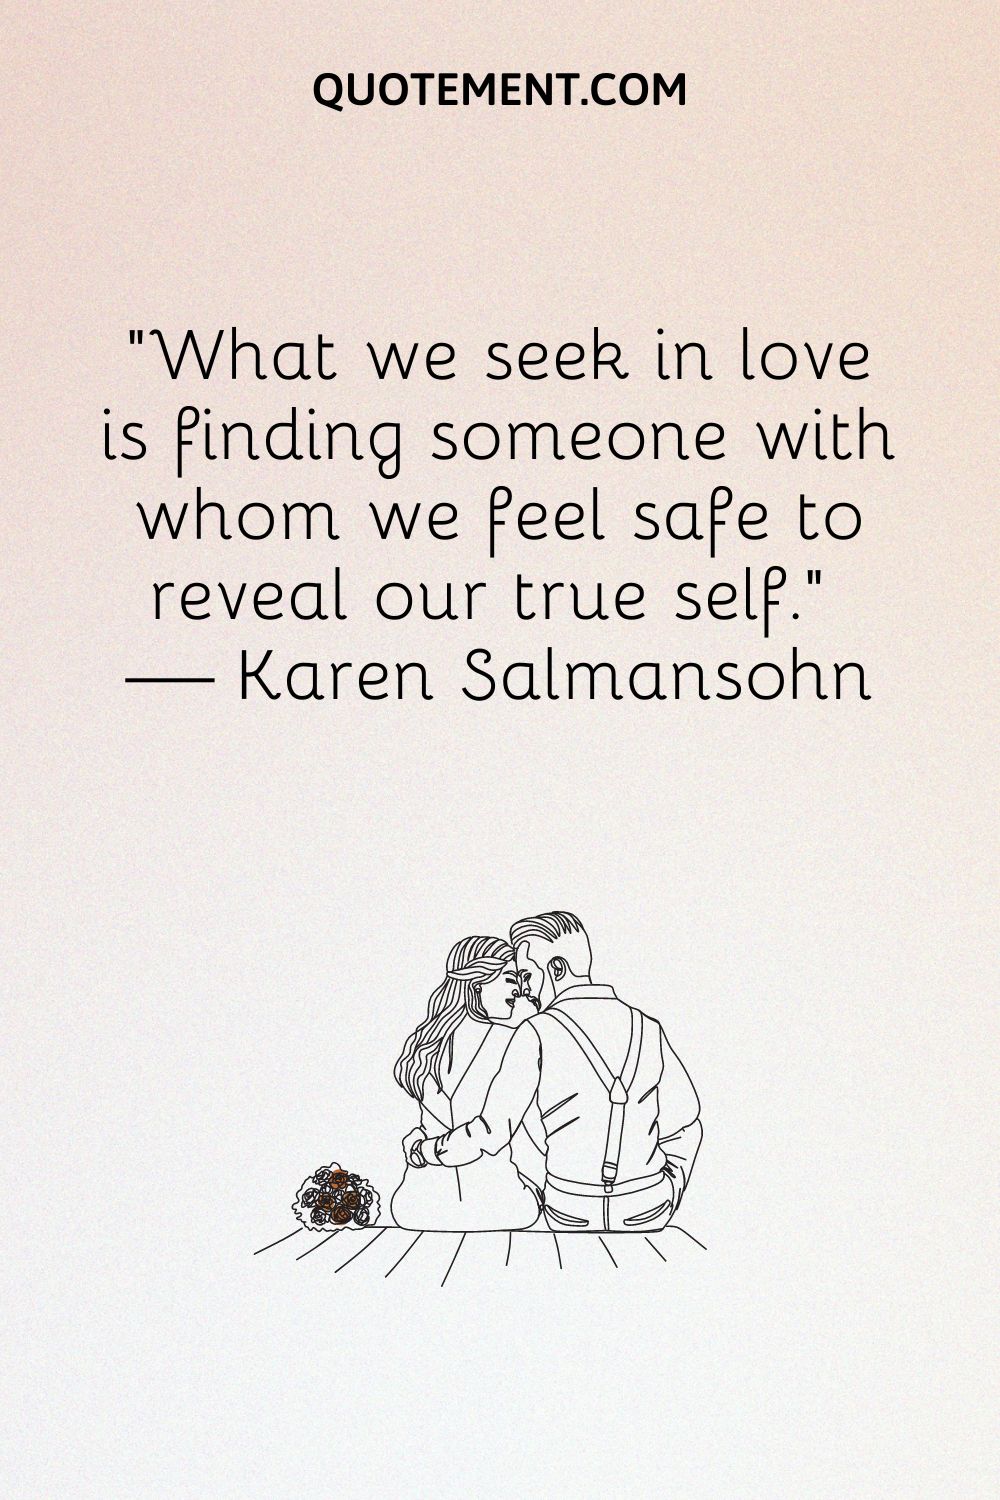 What we seek in love is finding someone with whom we feel safe to reveal our true self